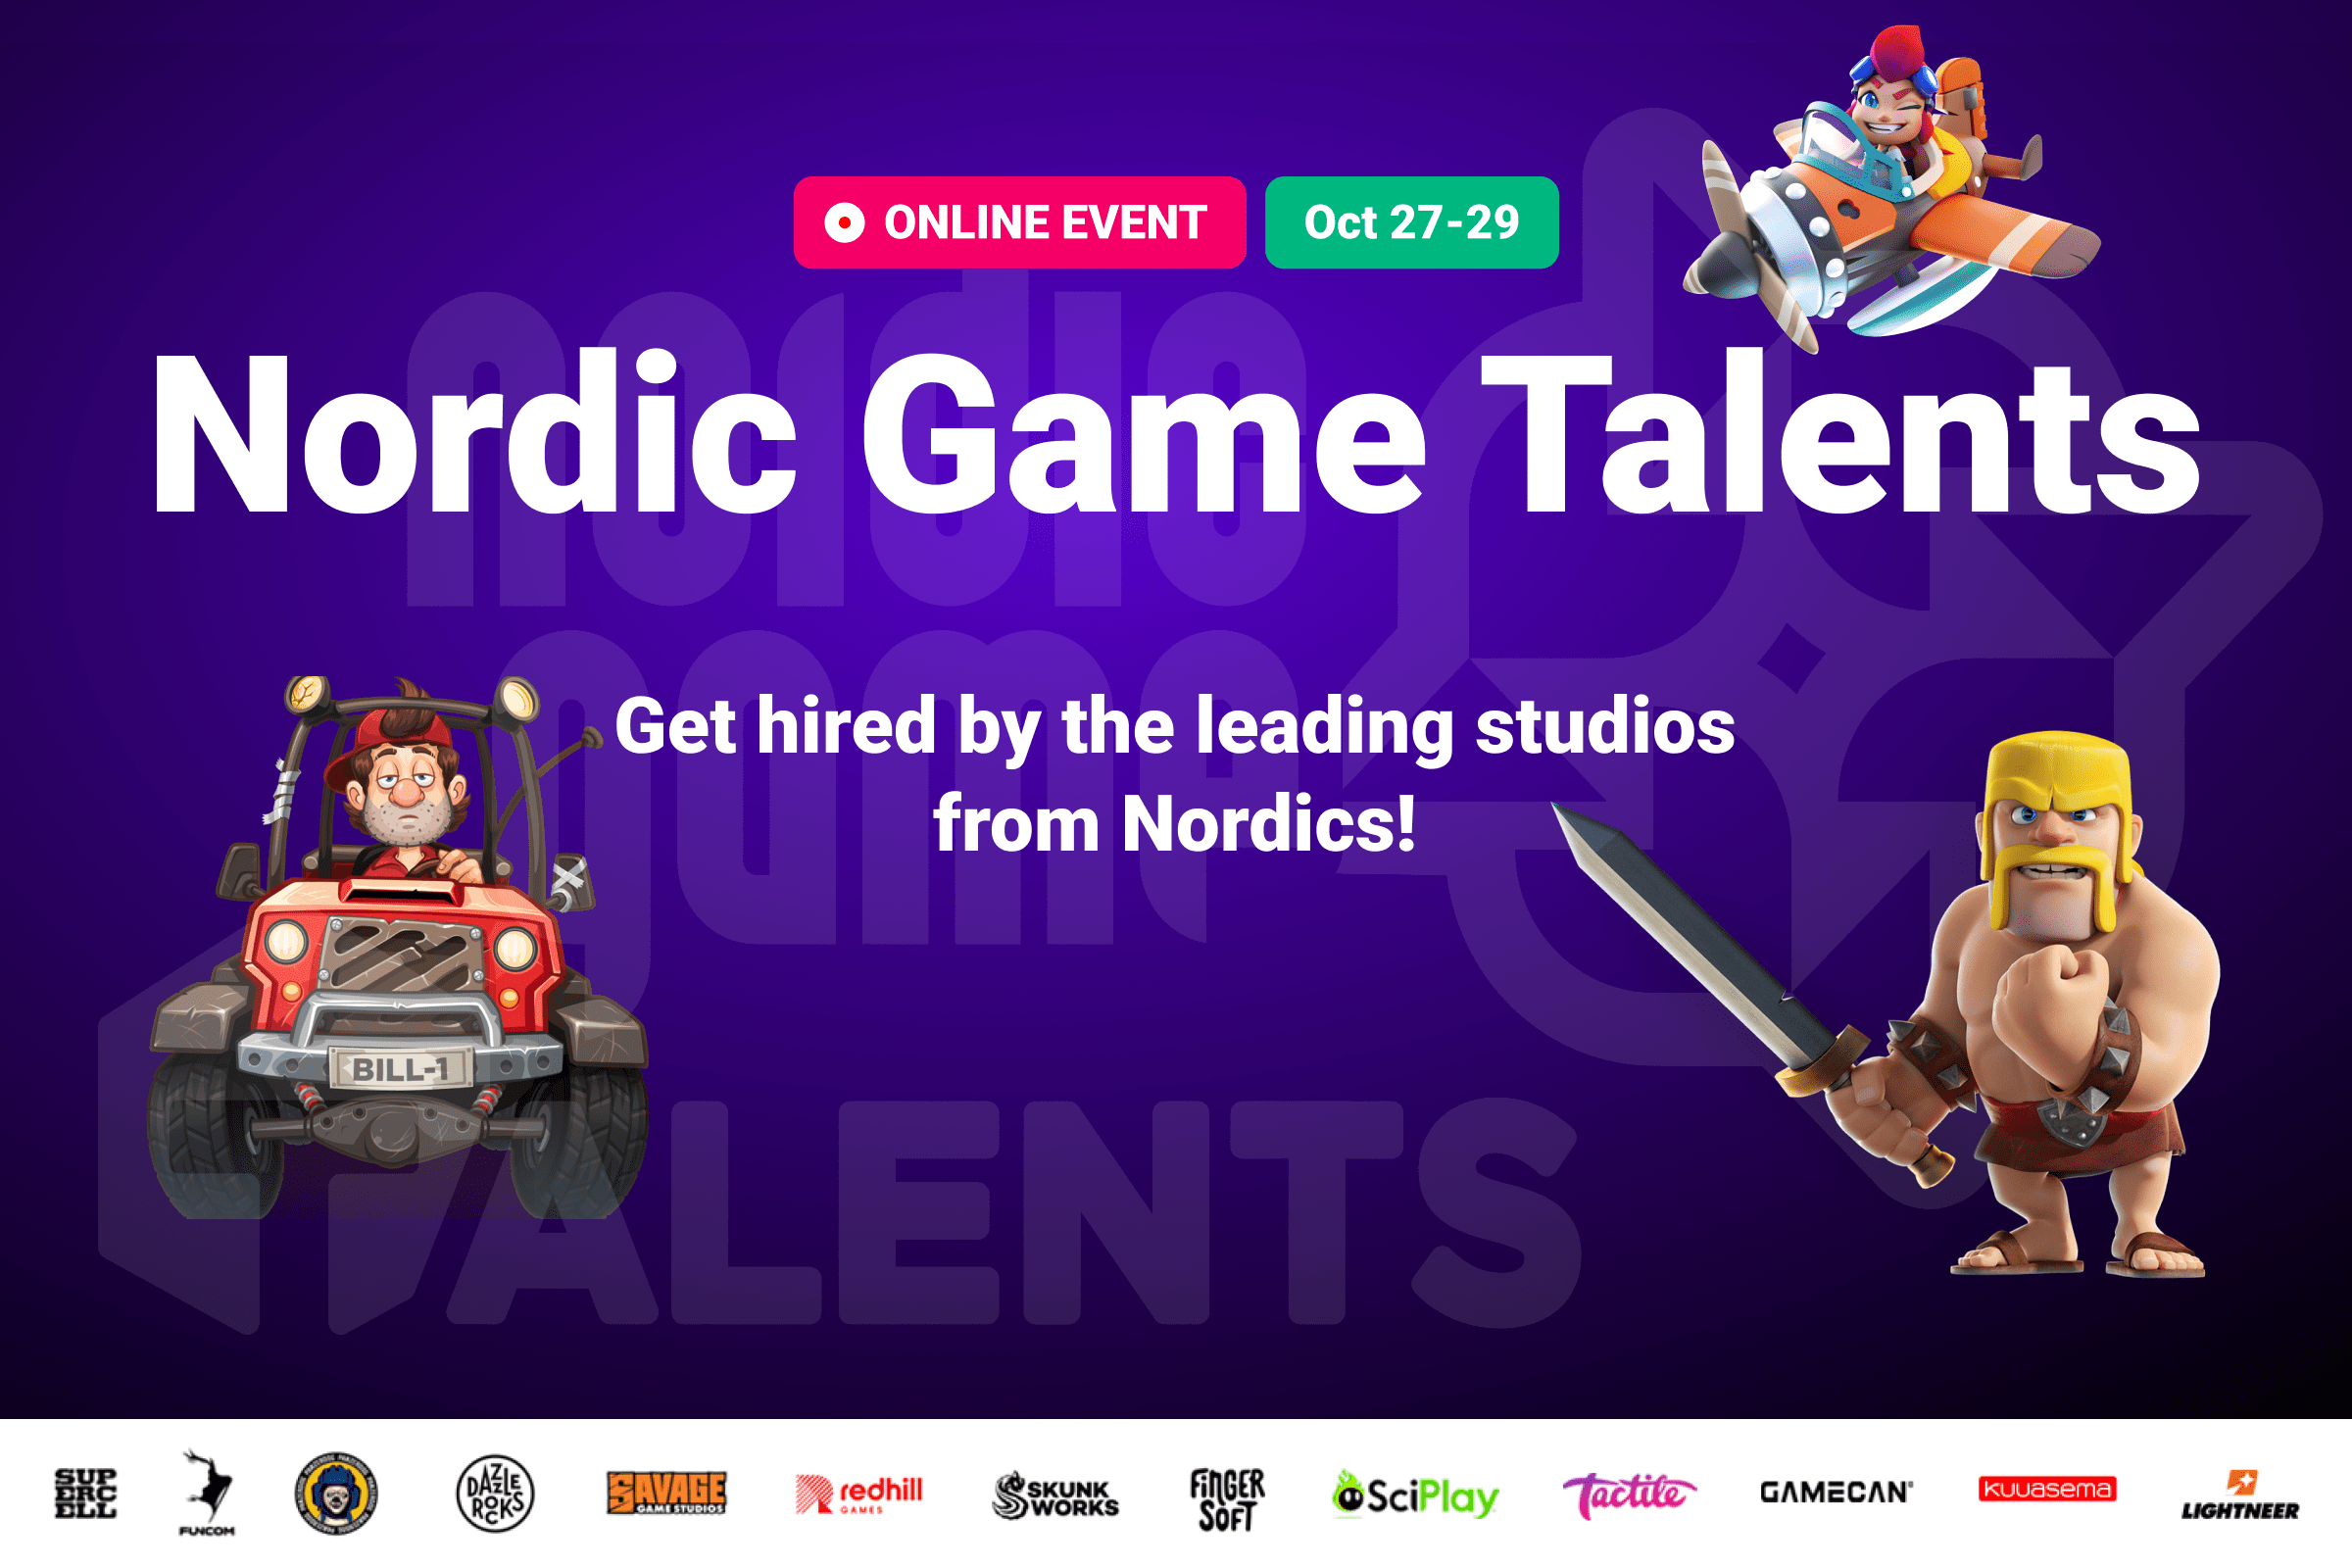 games-factory-talents-has-teamed-up-with-nordic-game-to-bring-you-nordic-game-talents.